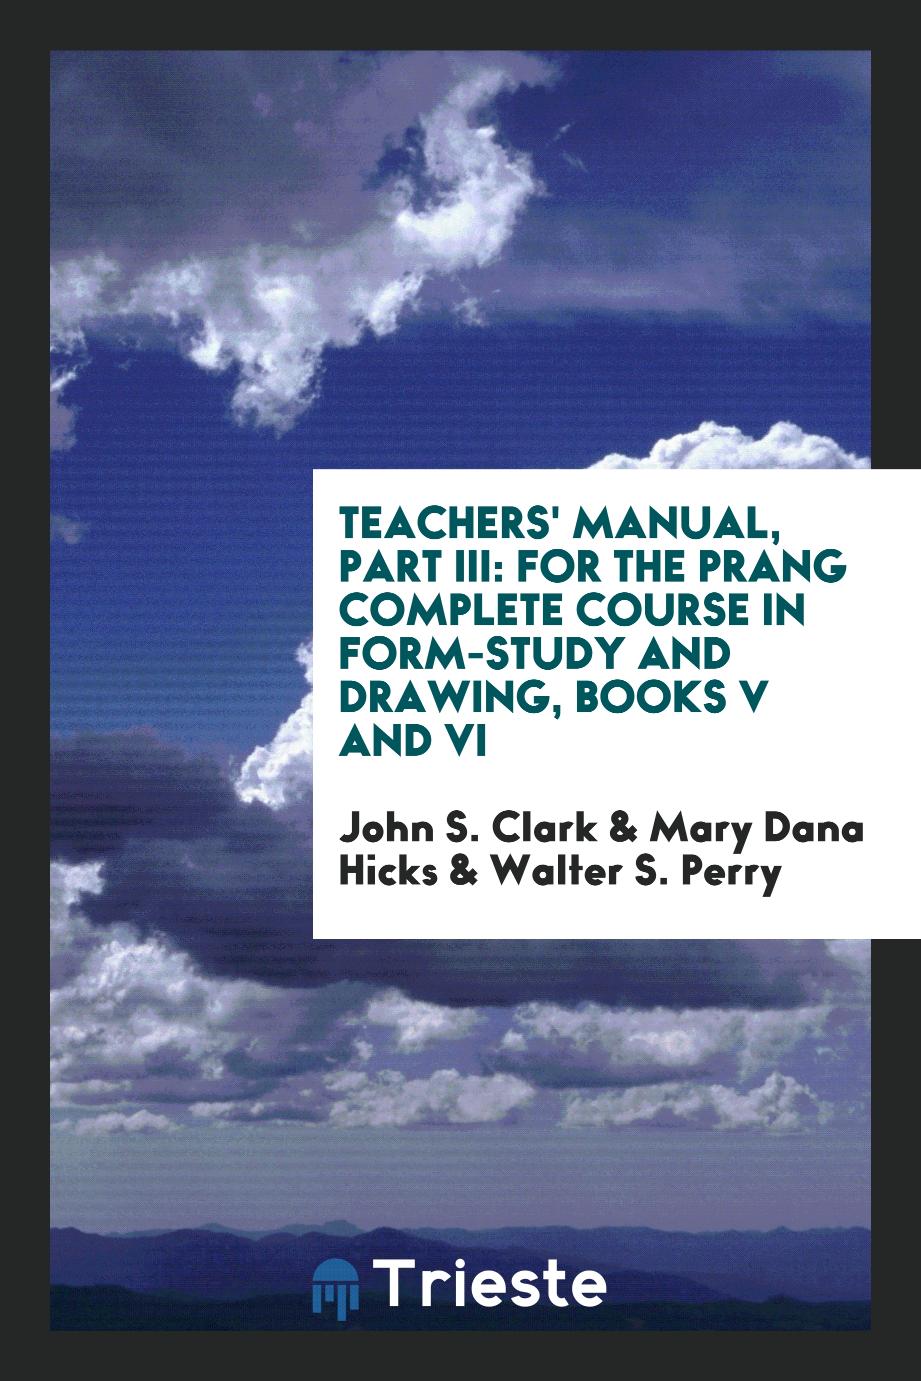 Teachers' Manual, Part III: For the Prang Complete Course in Form-Study and Drawing, Books V and VI